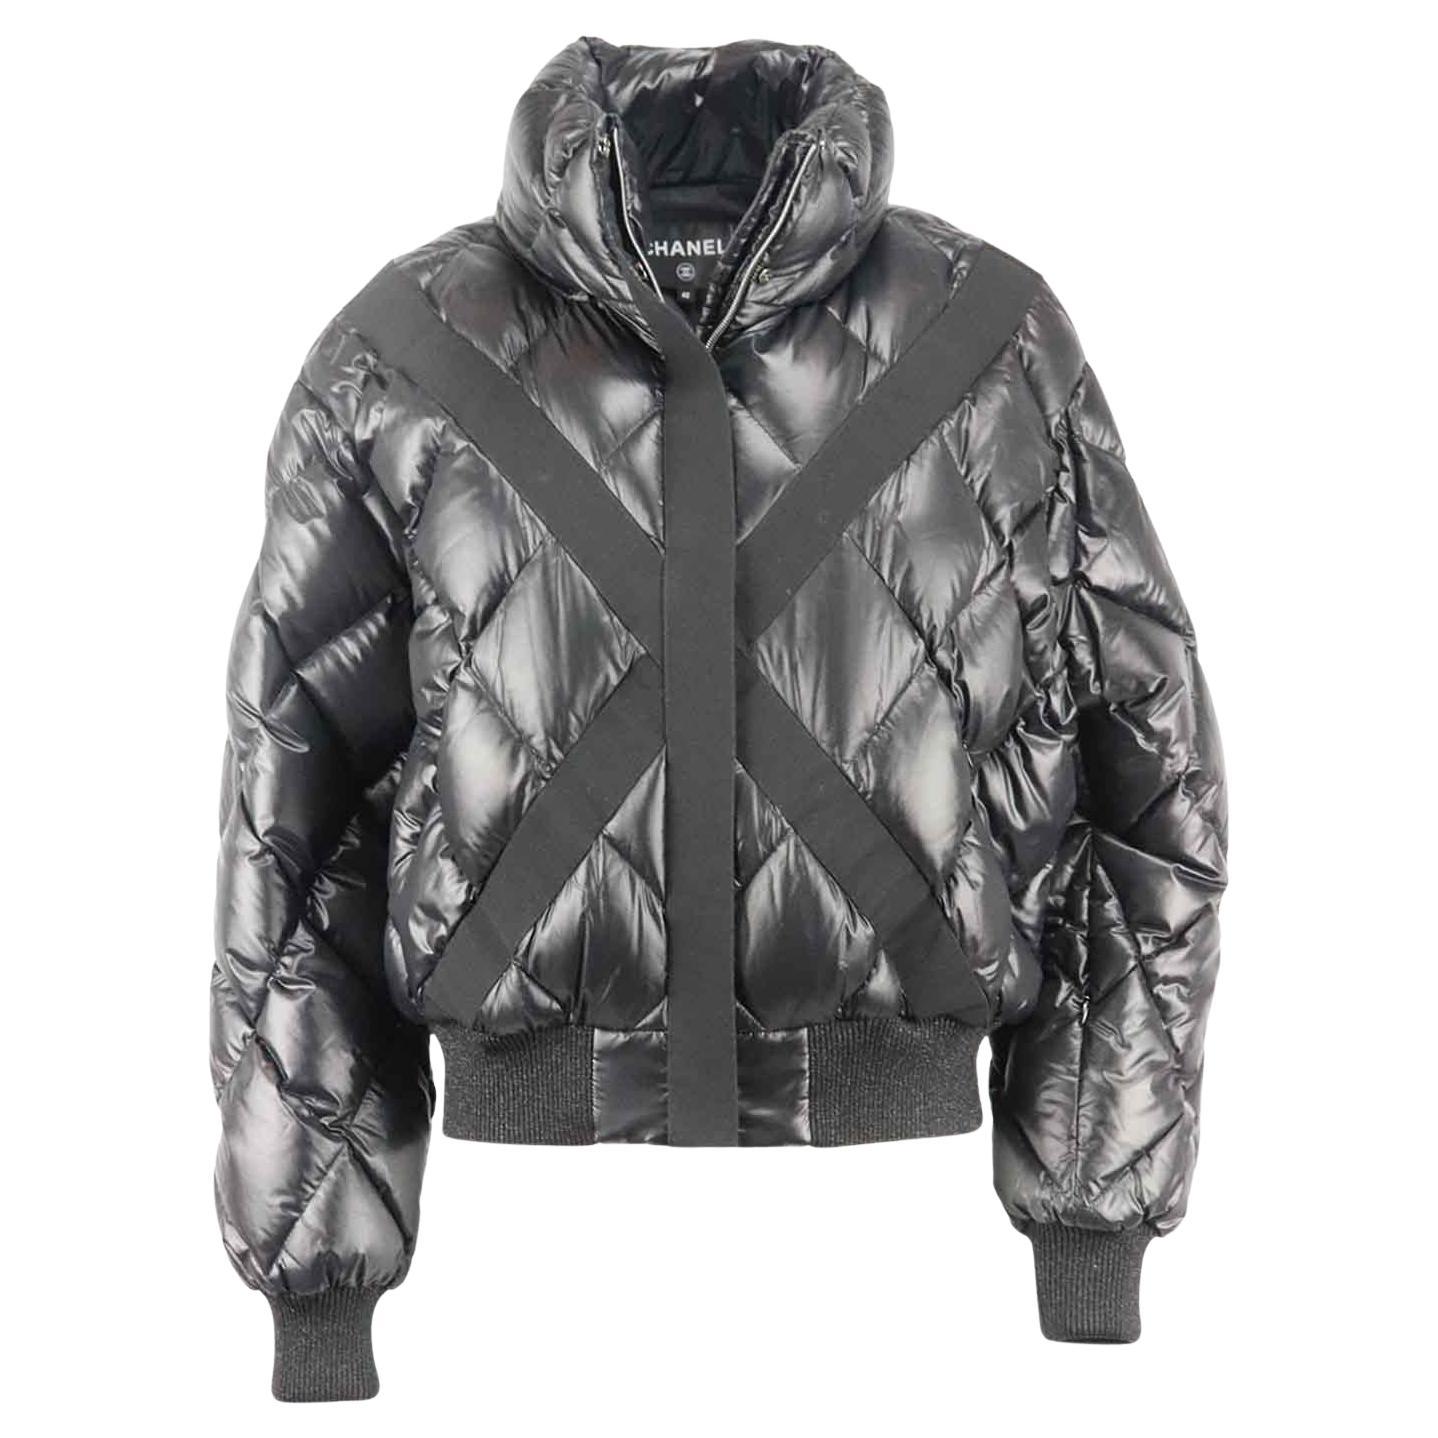 Chanel 2019 Quilted Shell Down Jacket FR 40 UK 12 